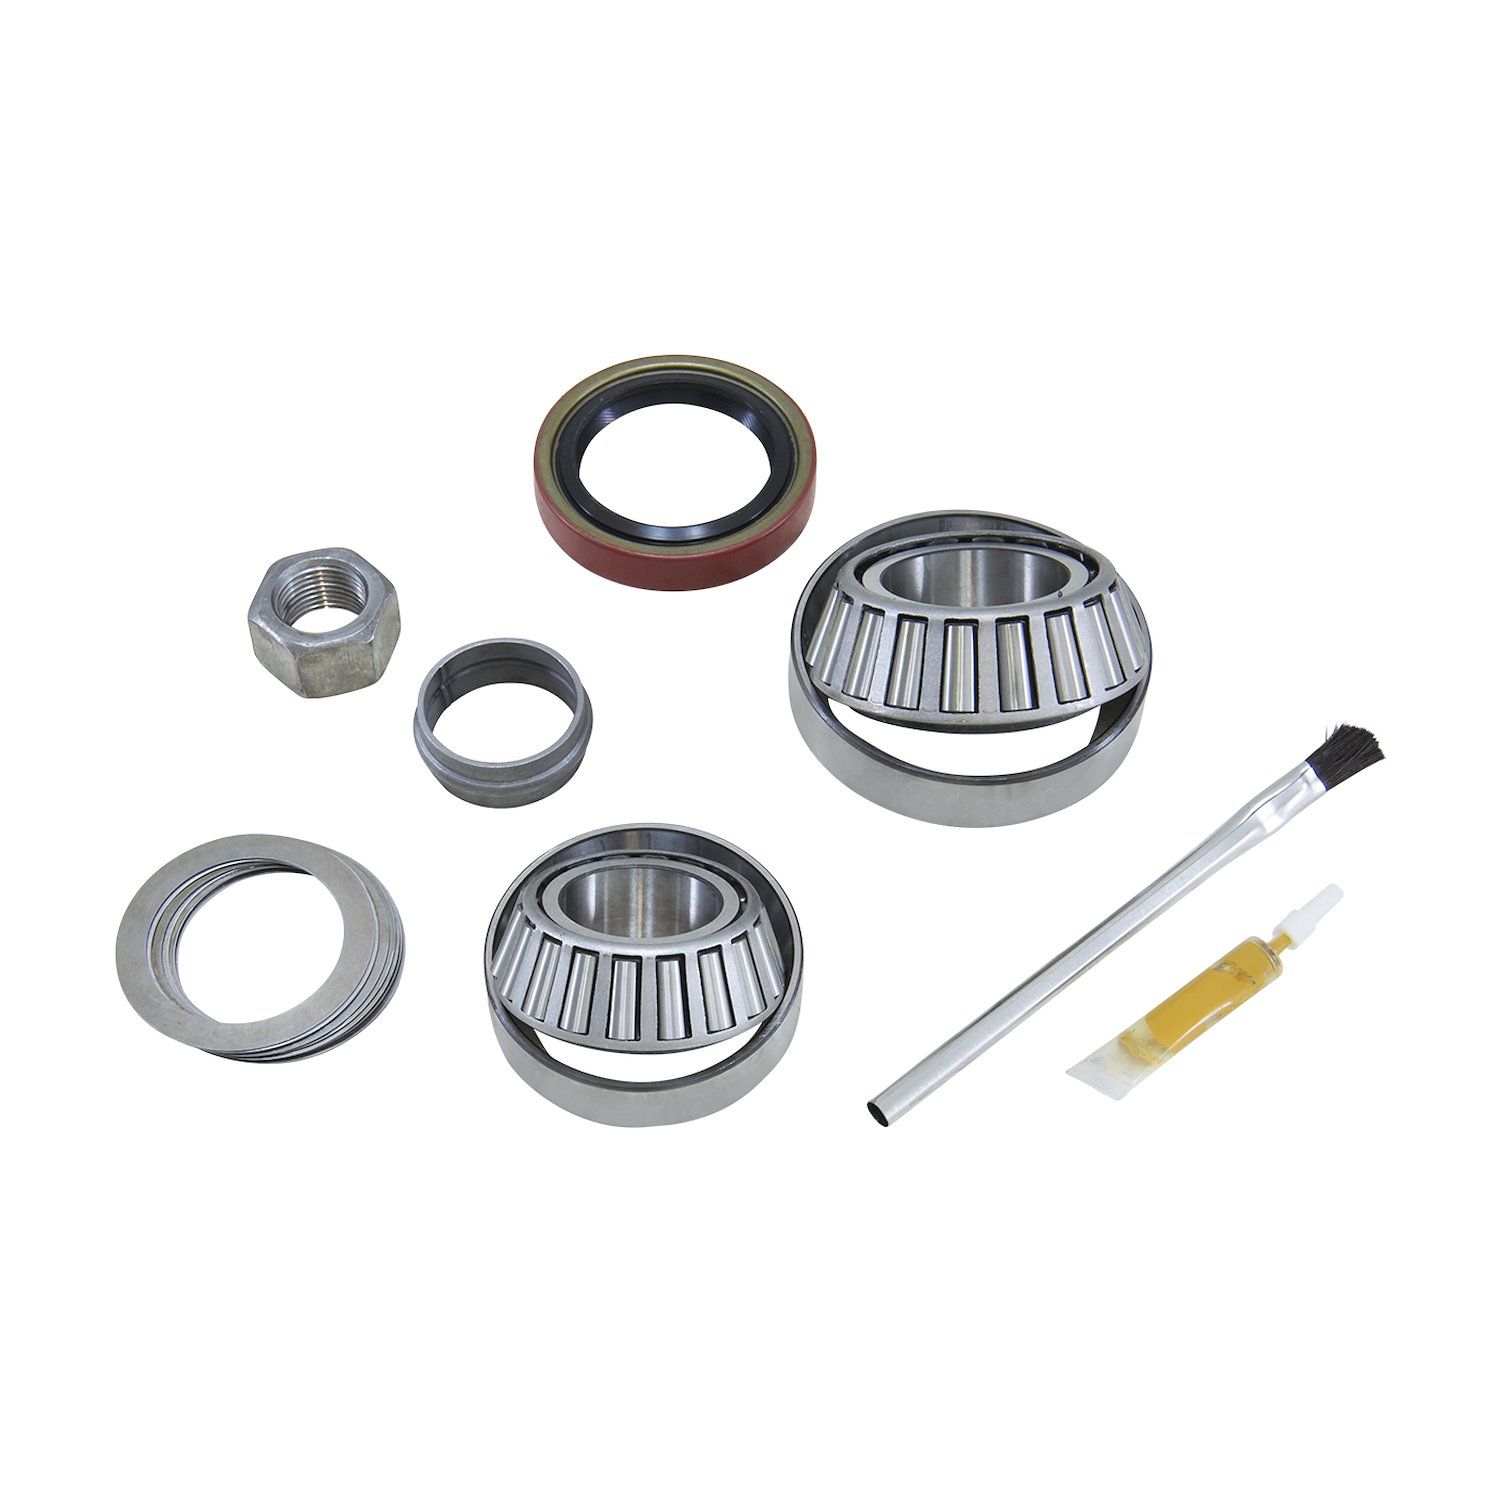 Pinion Install Kit For '89 To '98 10.5 in. GM 14 Bolt Truck Differential